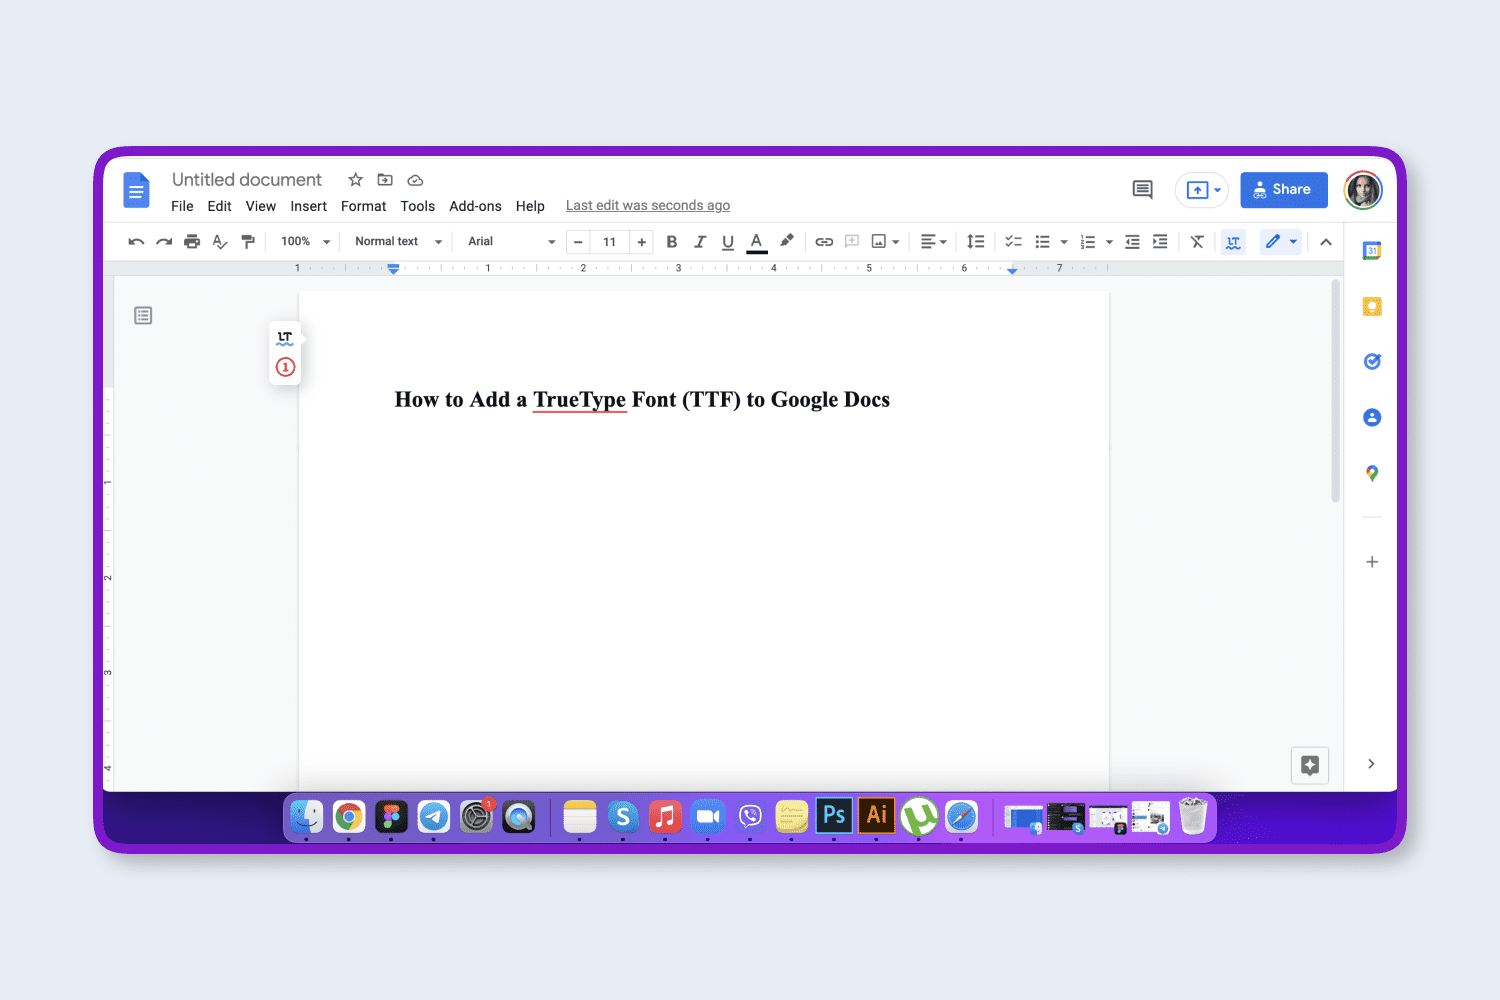 Open Google Docs and click More Fonts in the font selection menu.